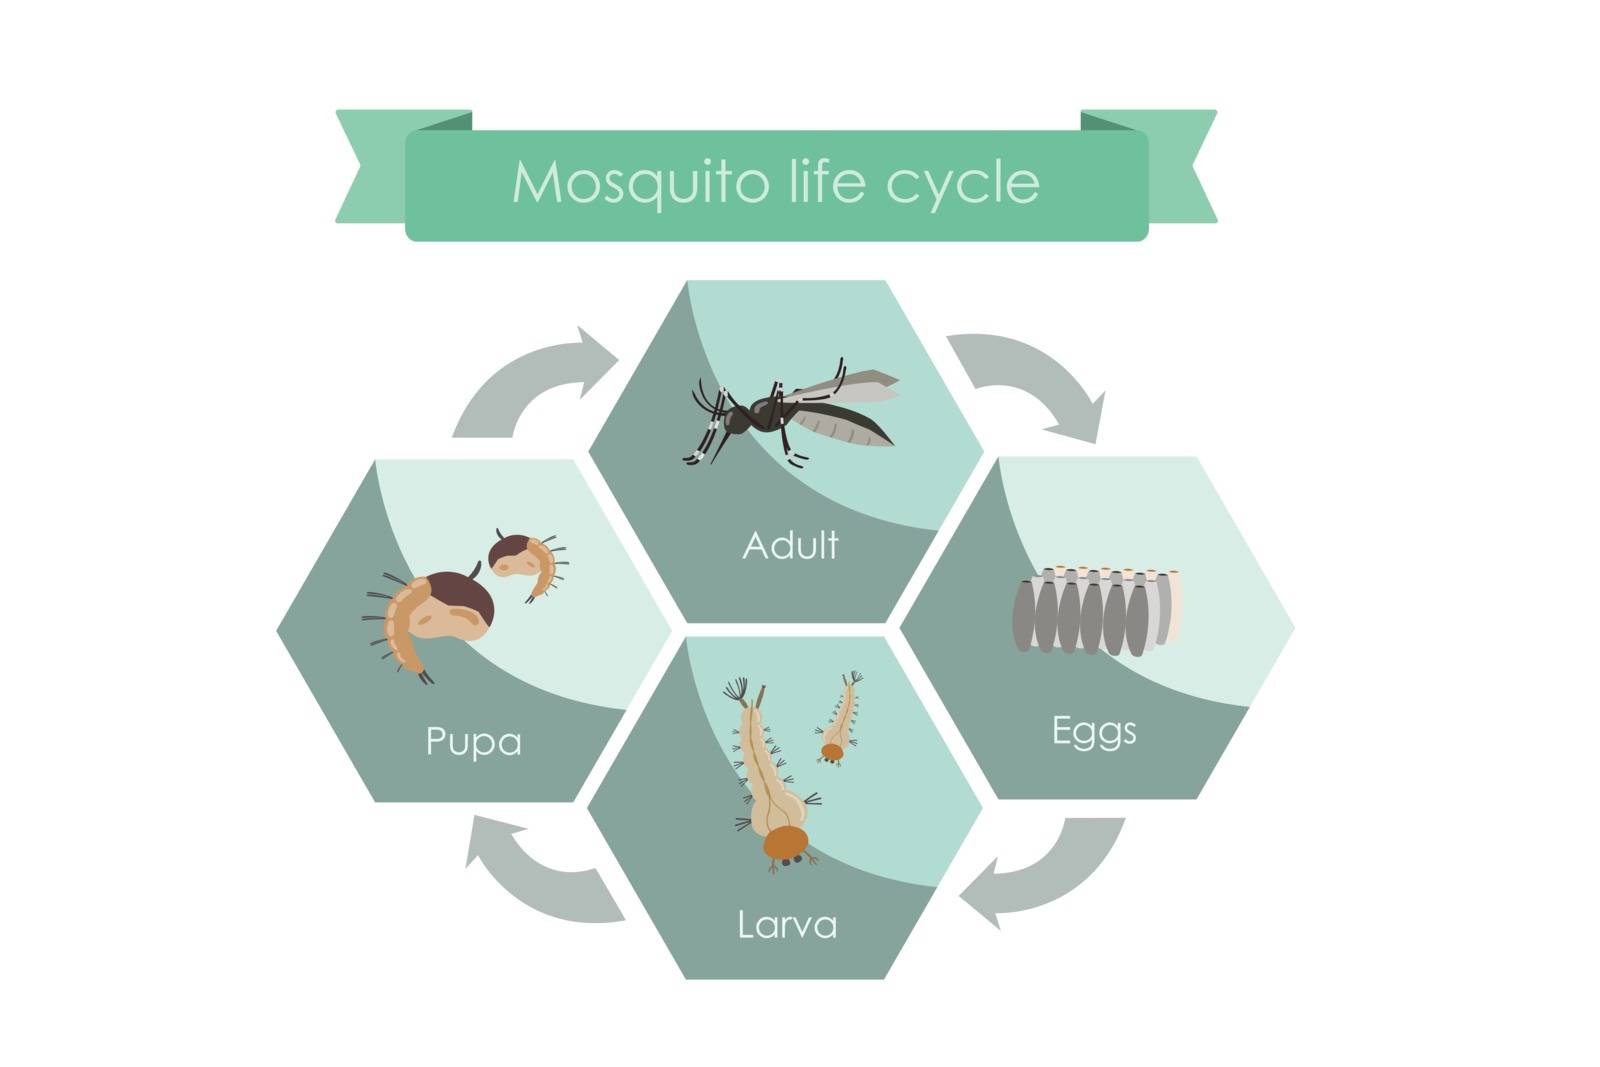 Life cycle of mosquitoes from egg to adult. Display chart showing life cycle of mosquito.